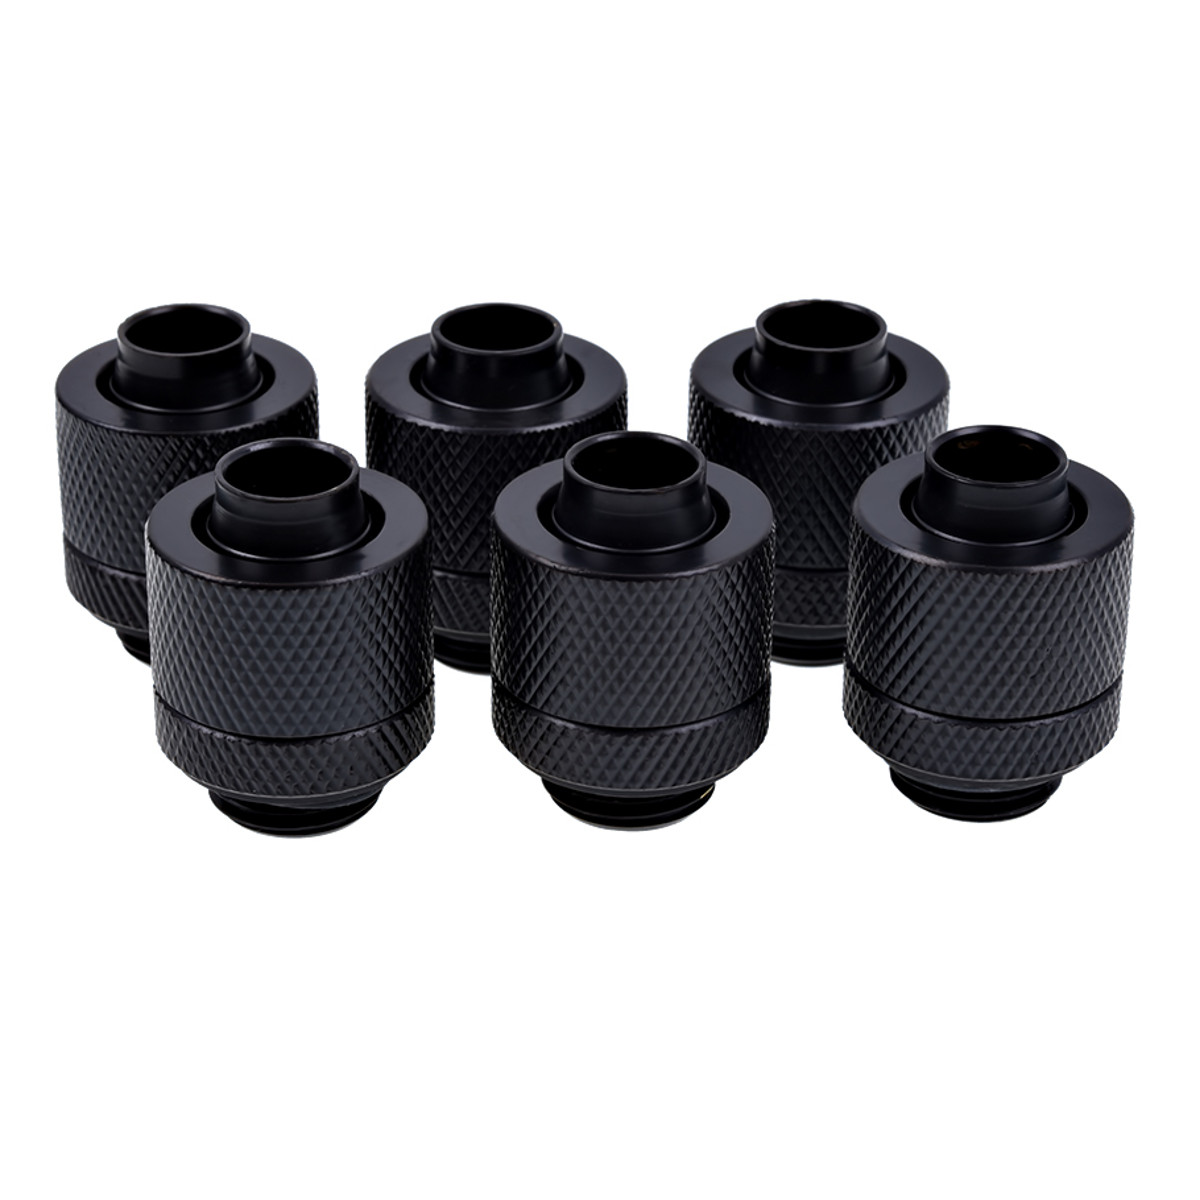 Alphacool Eiszapfen 13/10mm Deep Black Compression Fitting - Six Pack